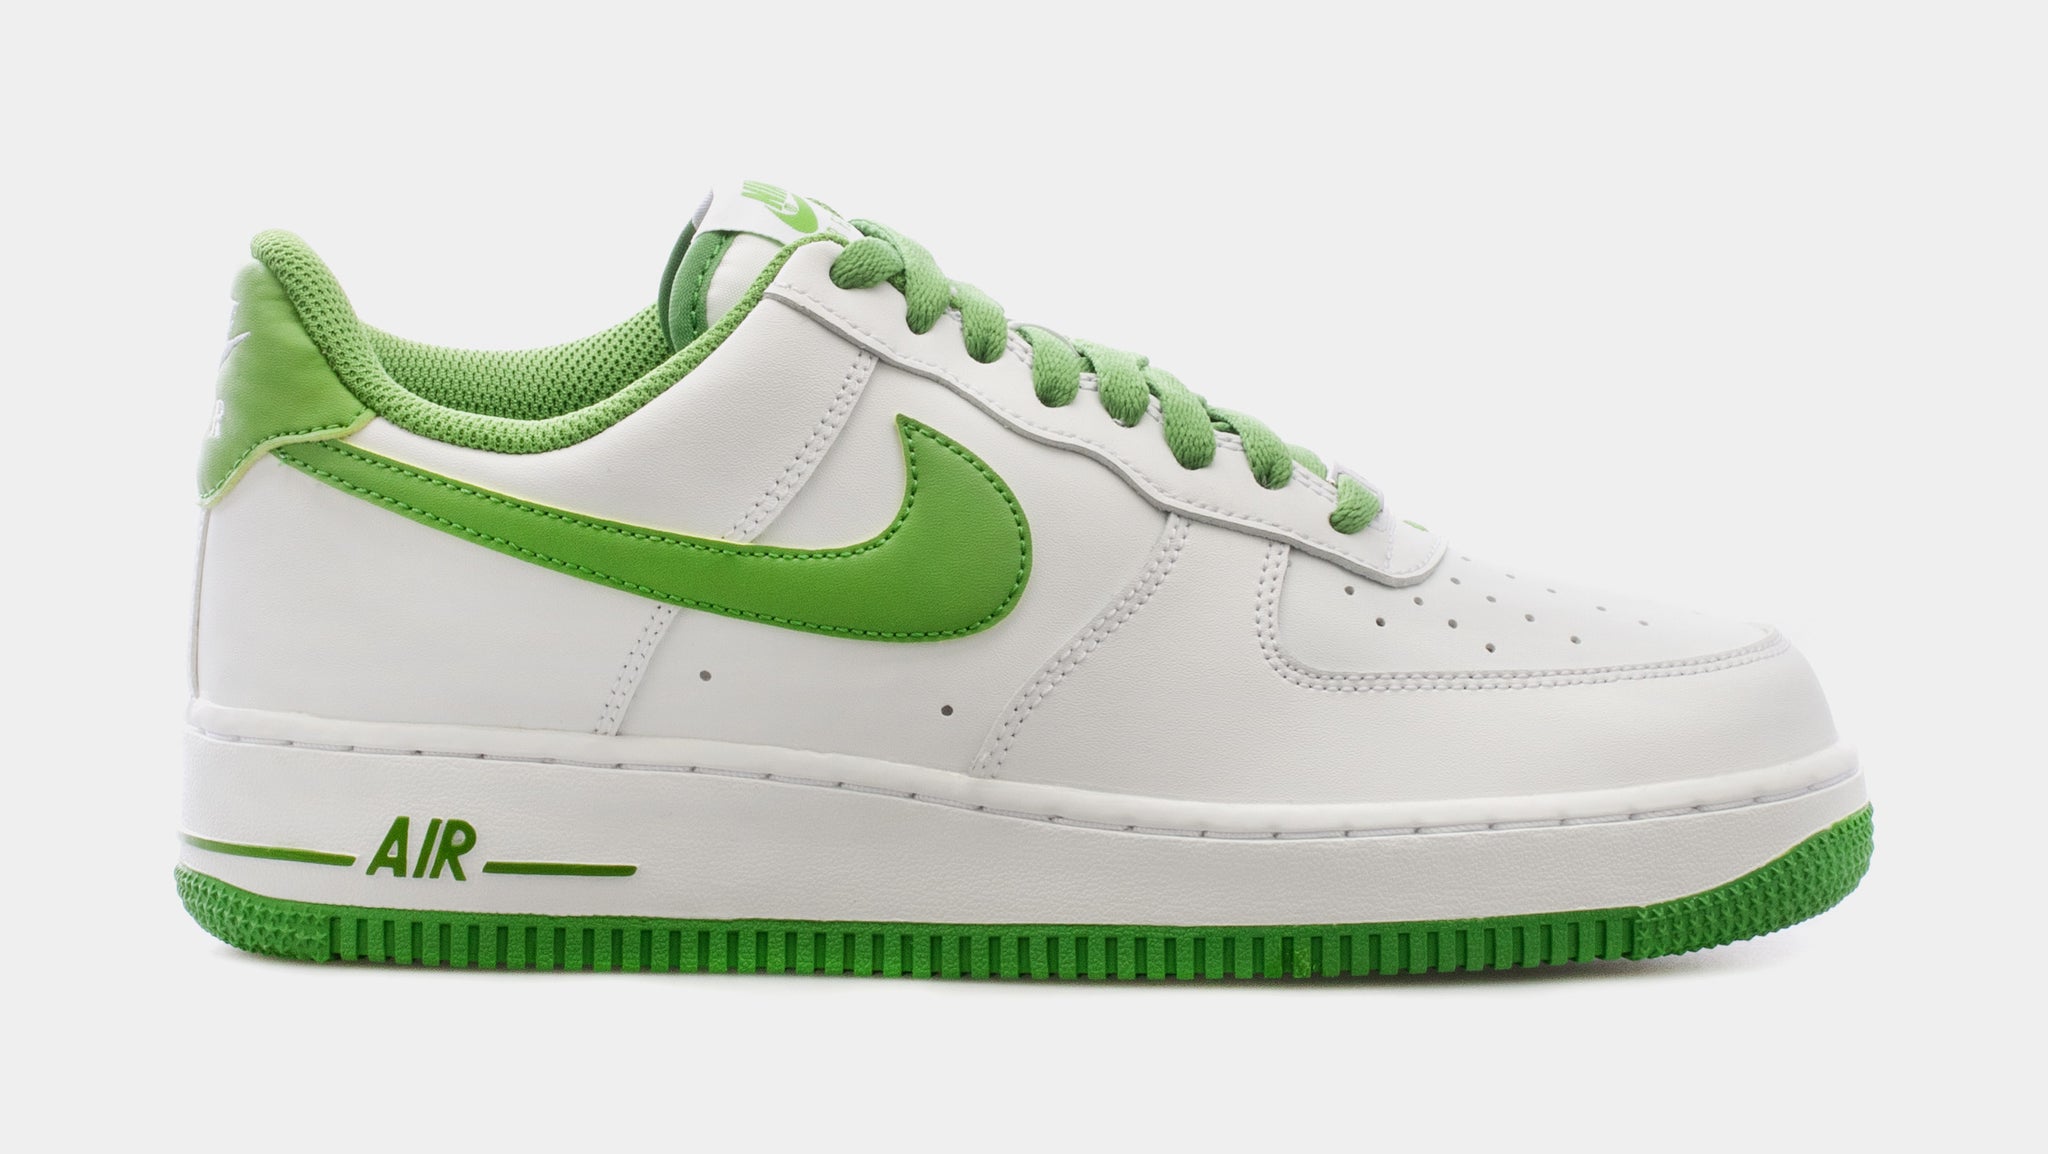 Nike Air Force 1 07 Chlorophyll Mens Lifestyle Shoes Green White